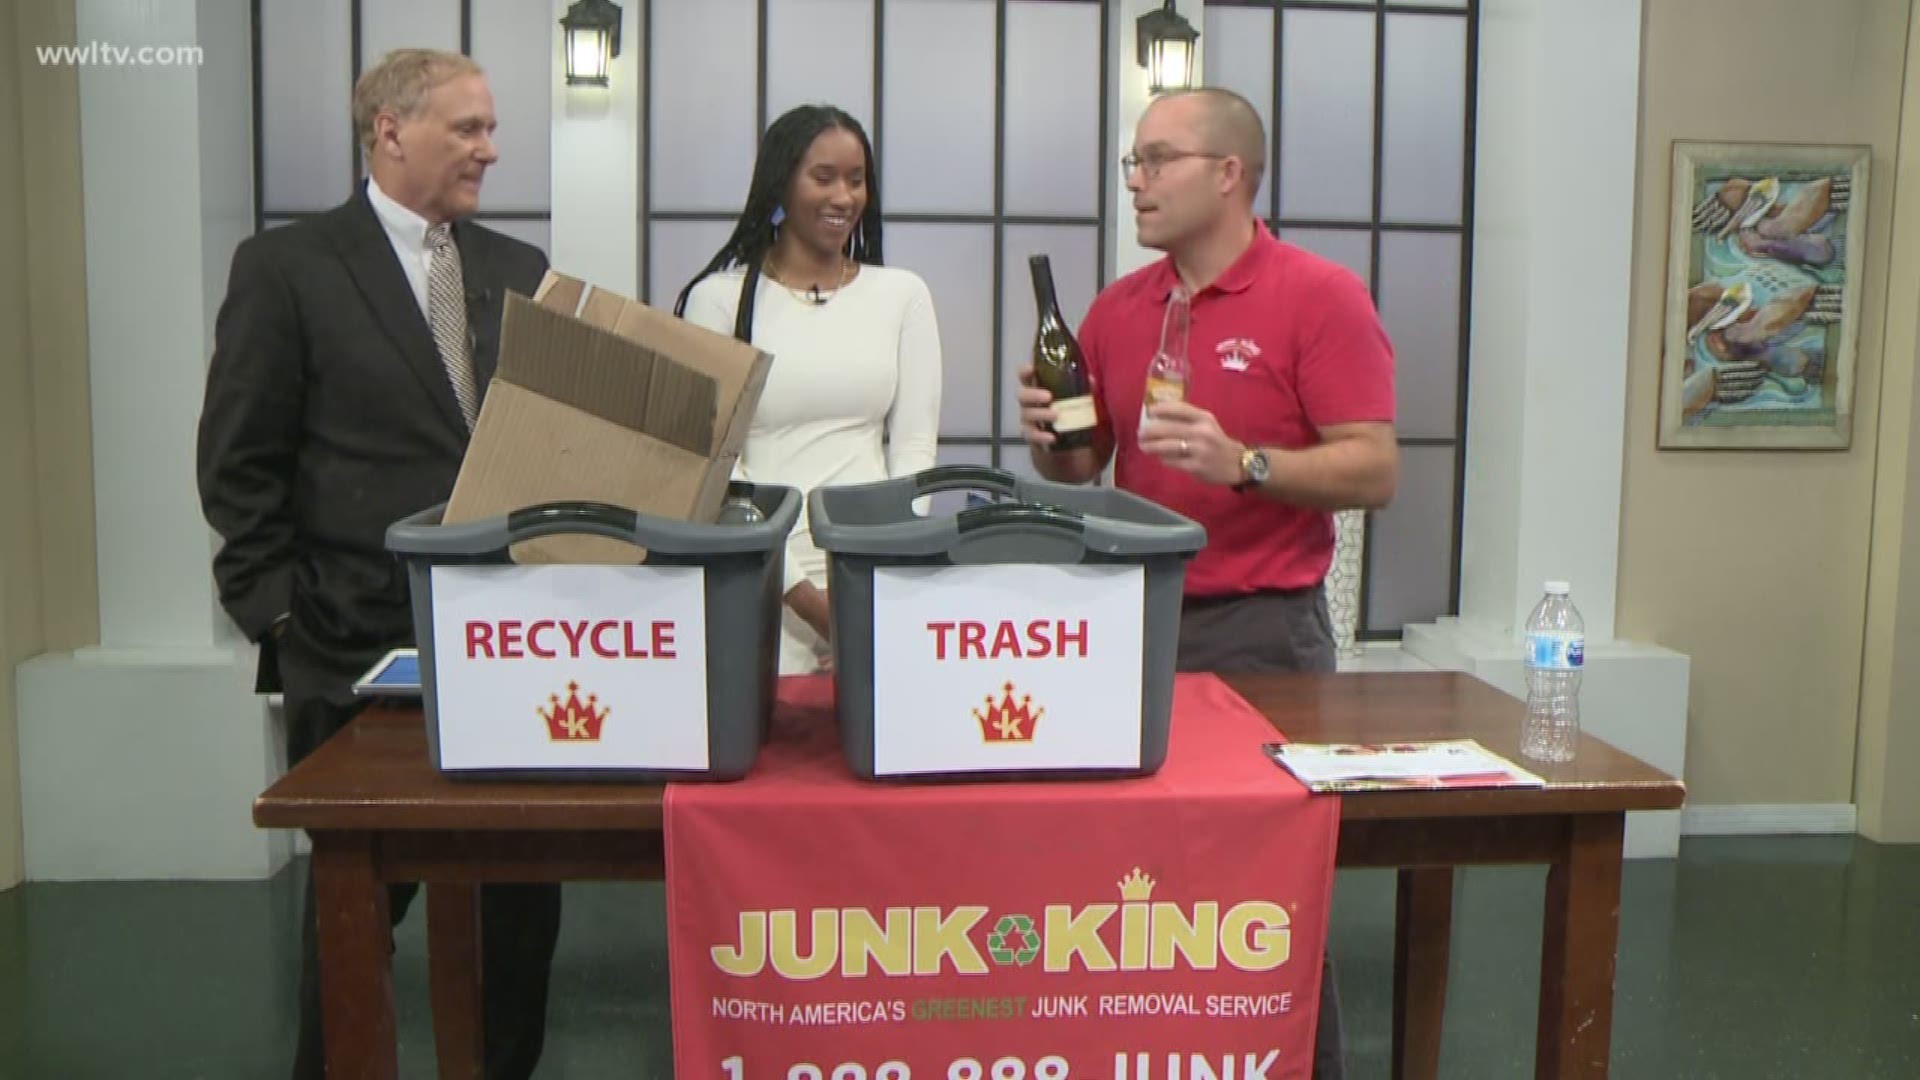 Miller Gunn with Junk King is helping to make Eric, Sheba and the city of New Orleans more recycle aware ahead of National Recycling Day.